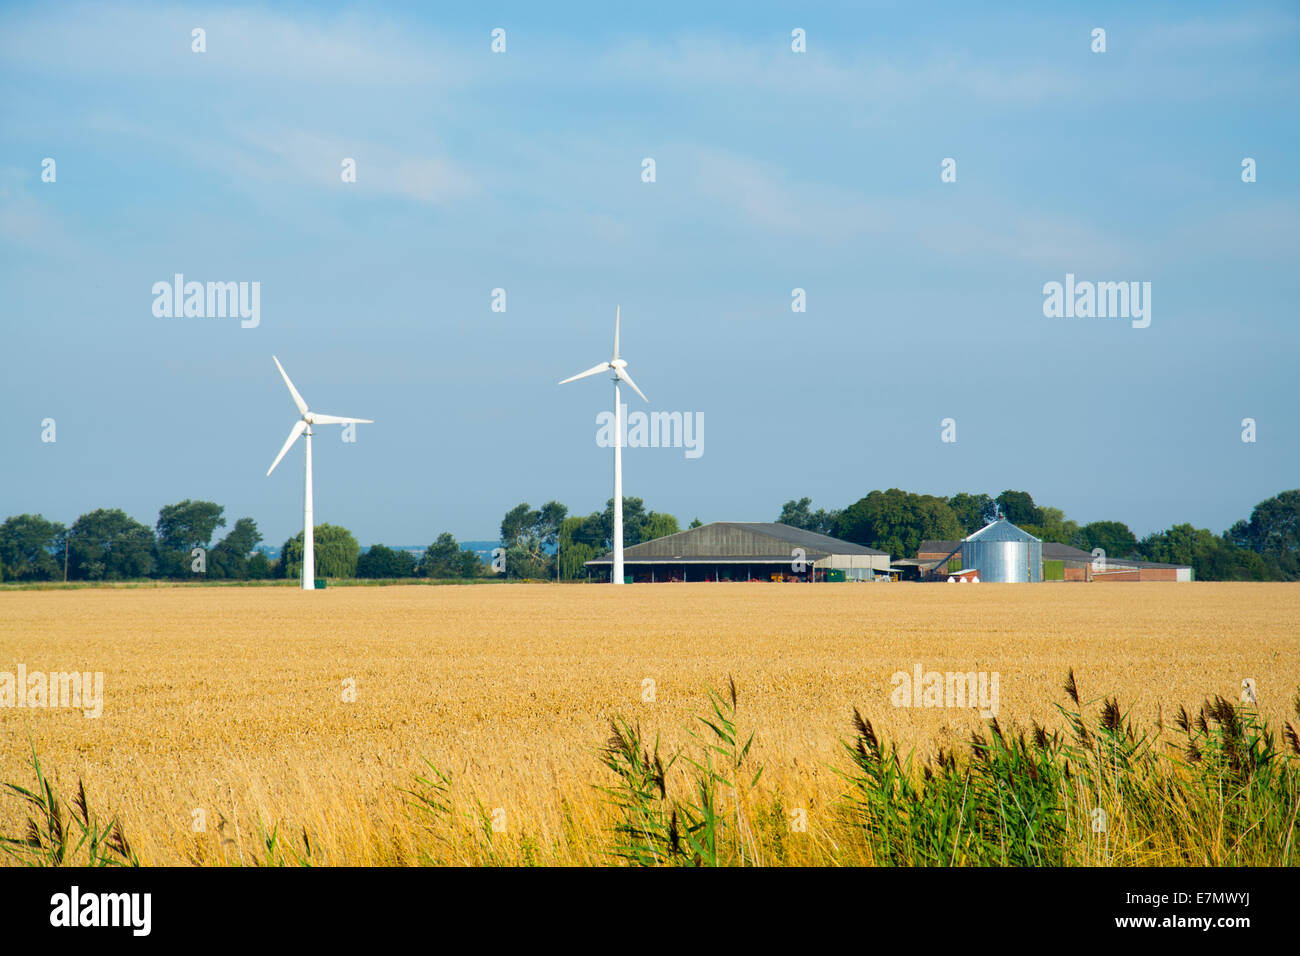 Typical English farmscape with farm buildings, wind turbines and corn field. Stock Photo